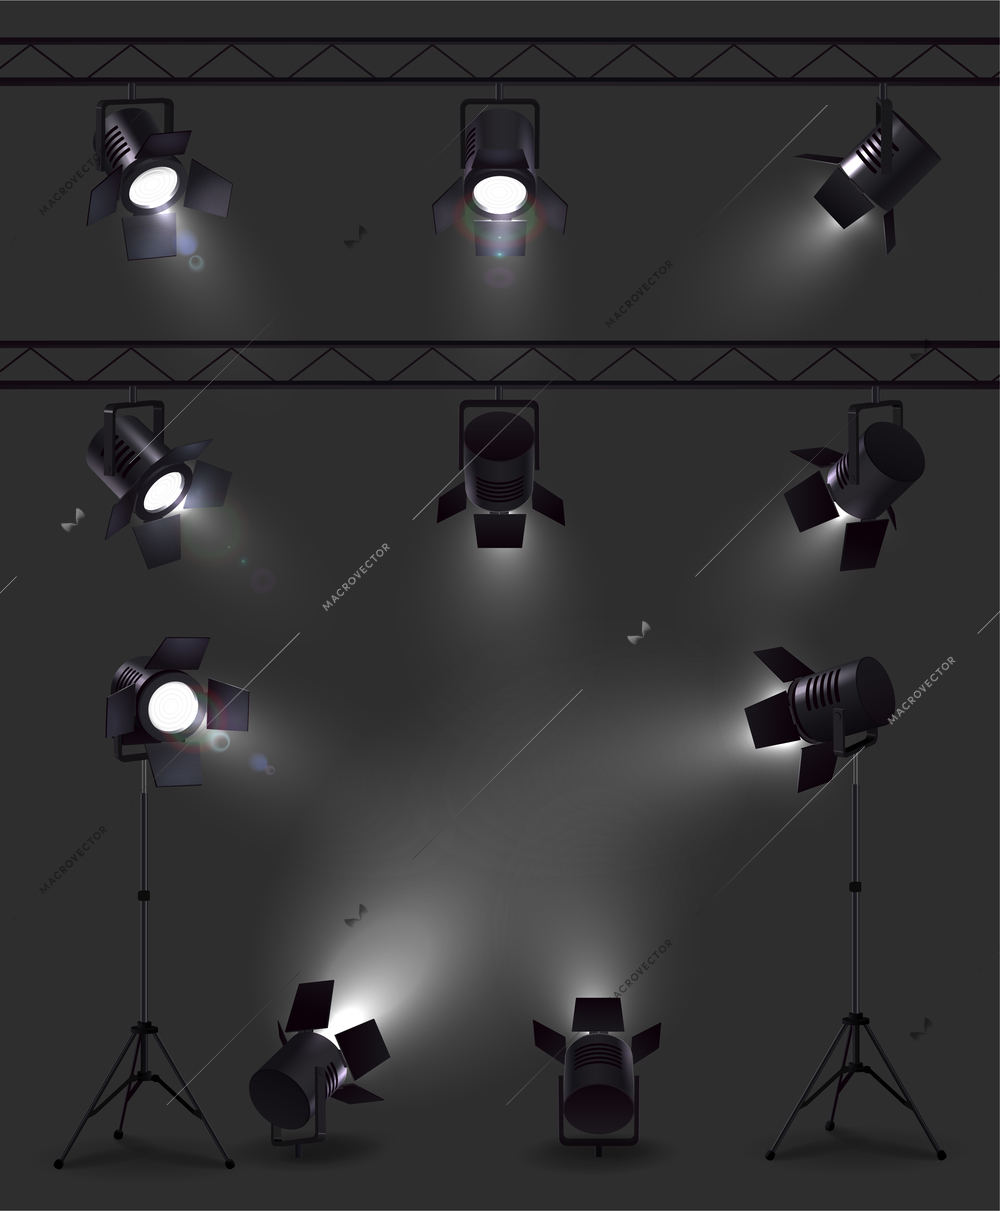 Spotlights set of realistic images with glowing spot lights from different angles with stands and reels vector illustration